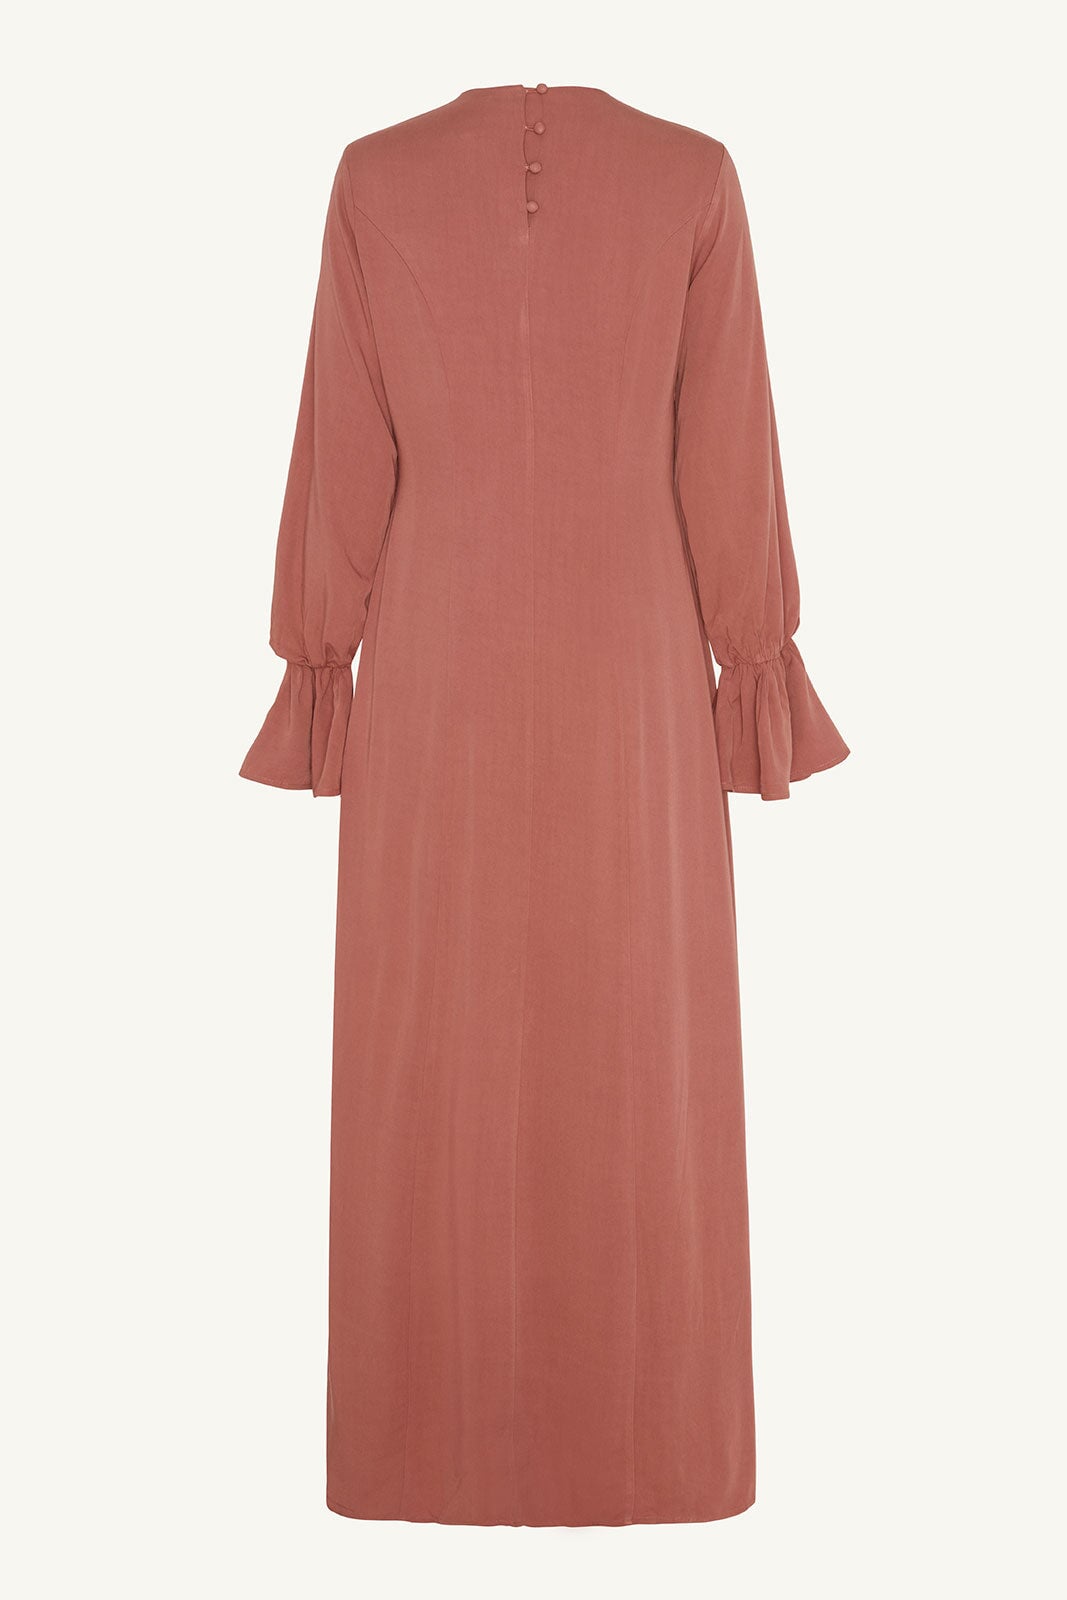 Deanna Button Front Maxi Dress - Rosewood Clothing epschoolboard 